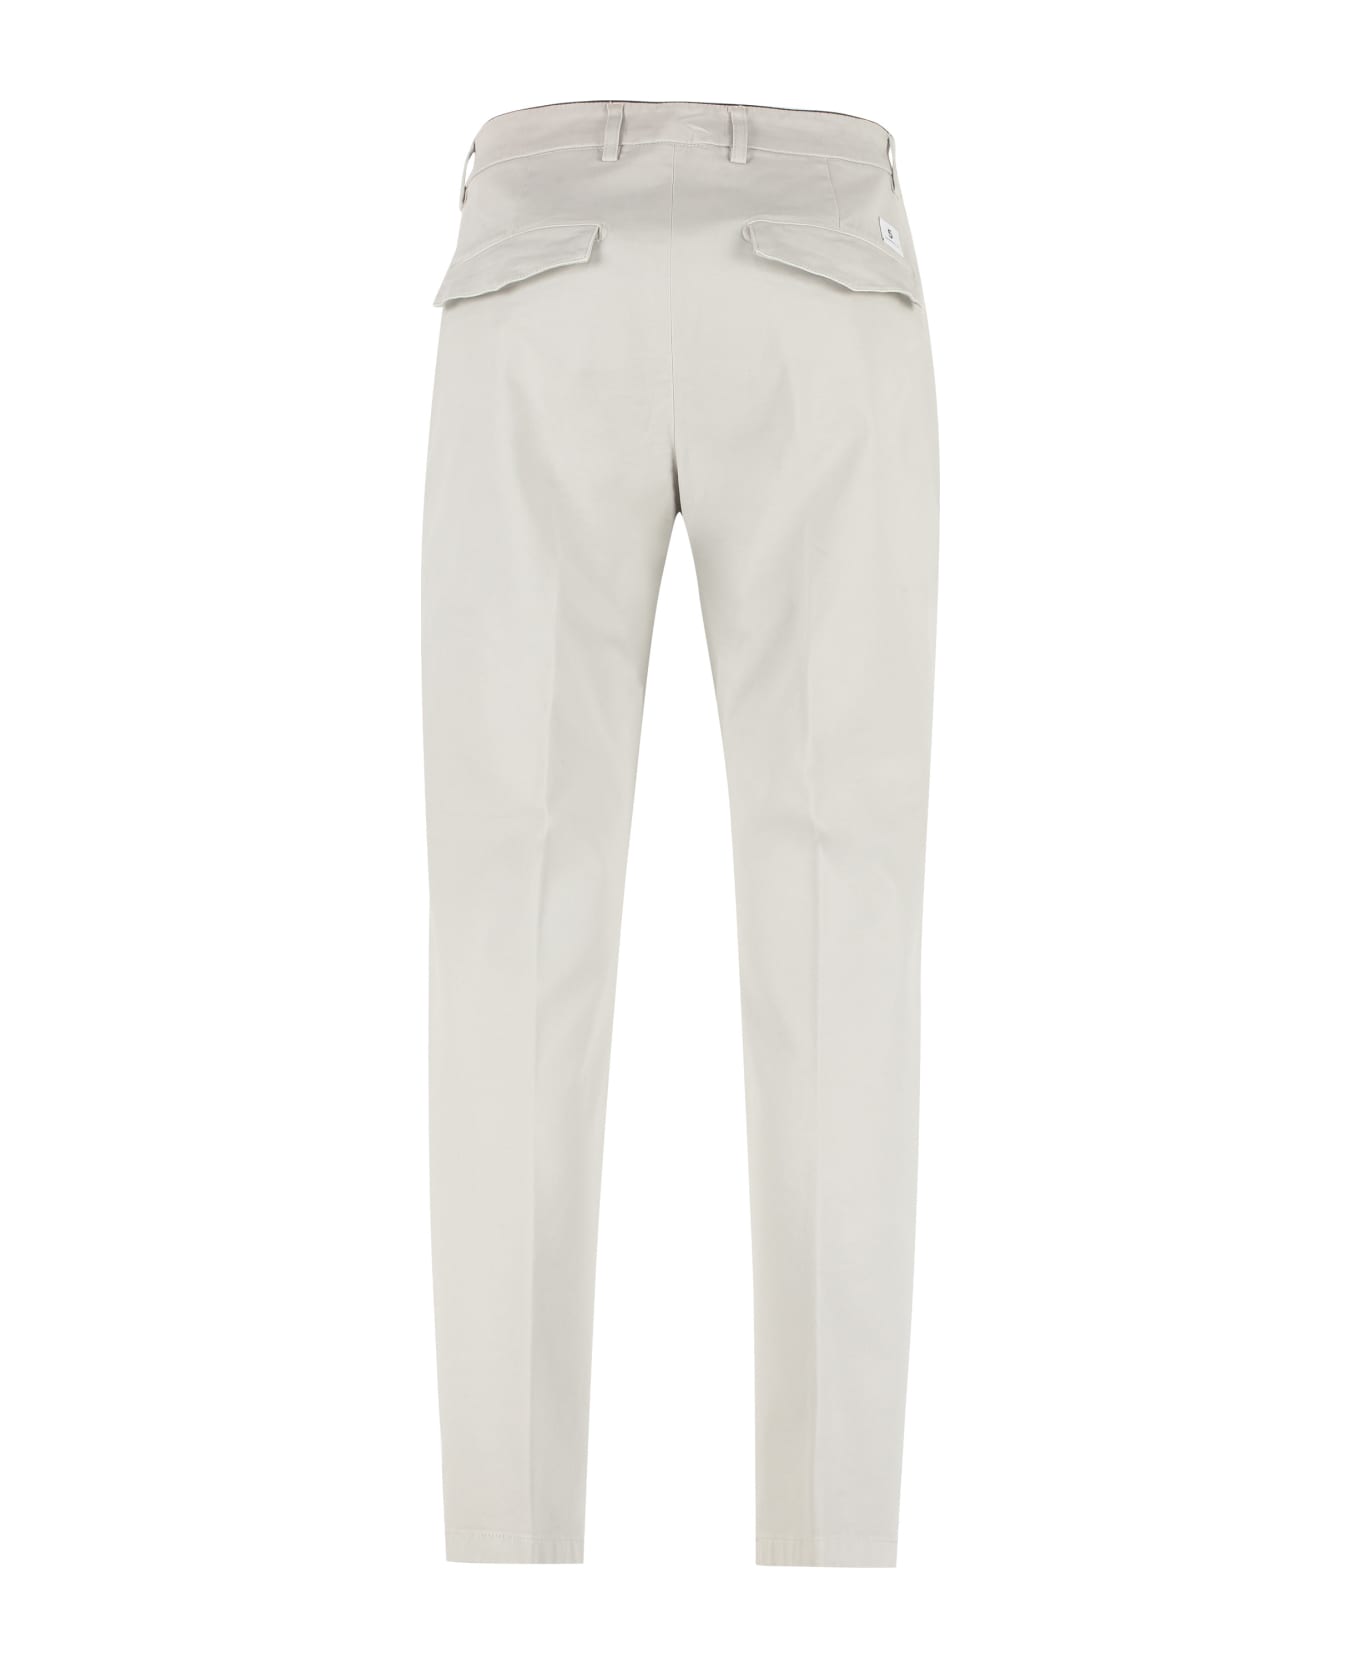 Department Five Prince Cotton Chino Trousers - grey ボトムス